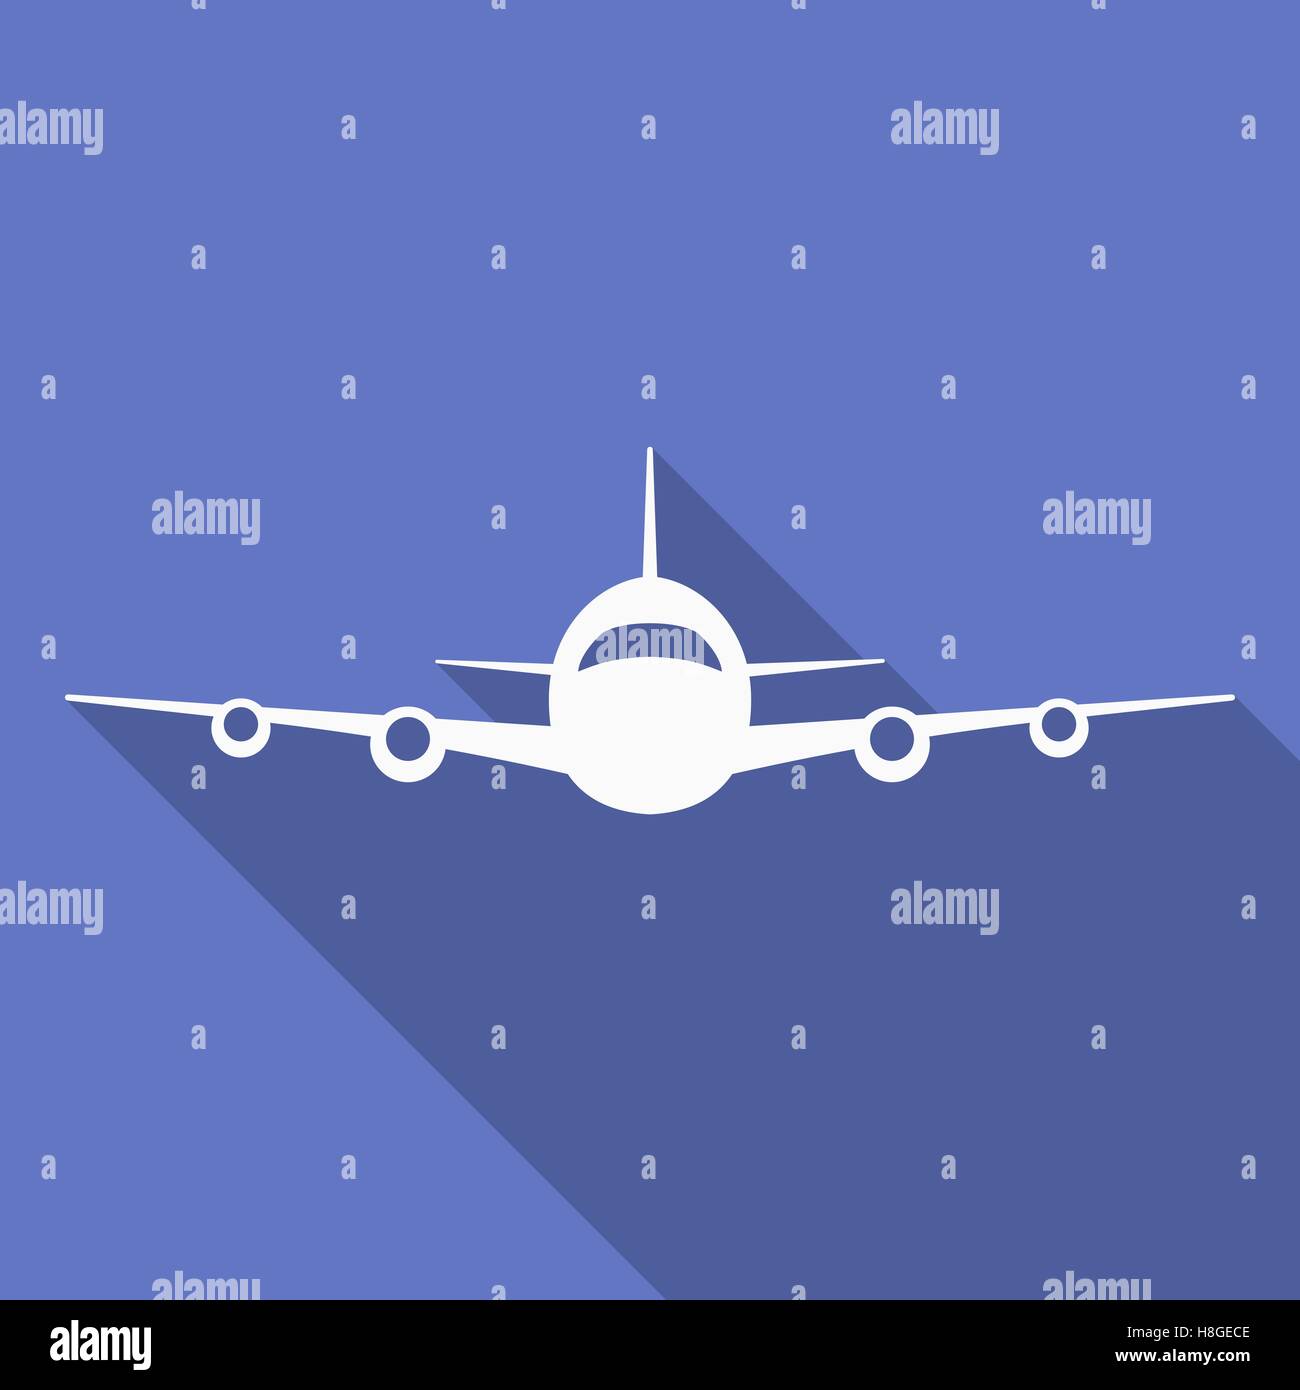 Icon of Plane. Airplane symbol front view. Aircraft vector silhouette ...